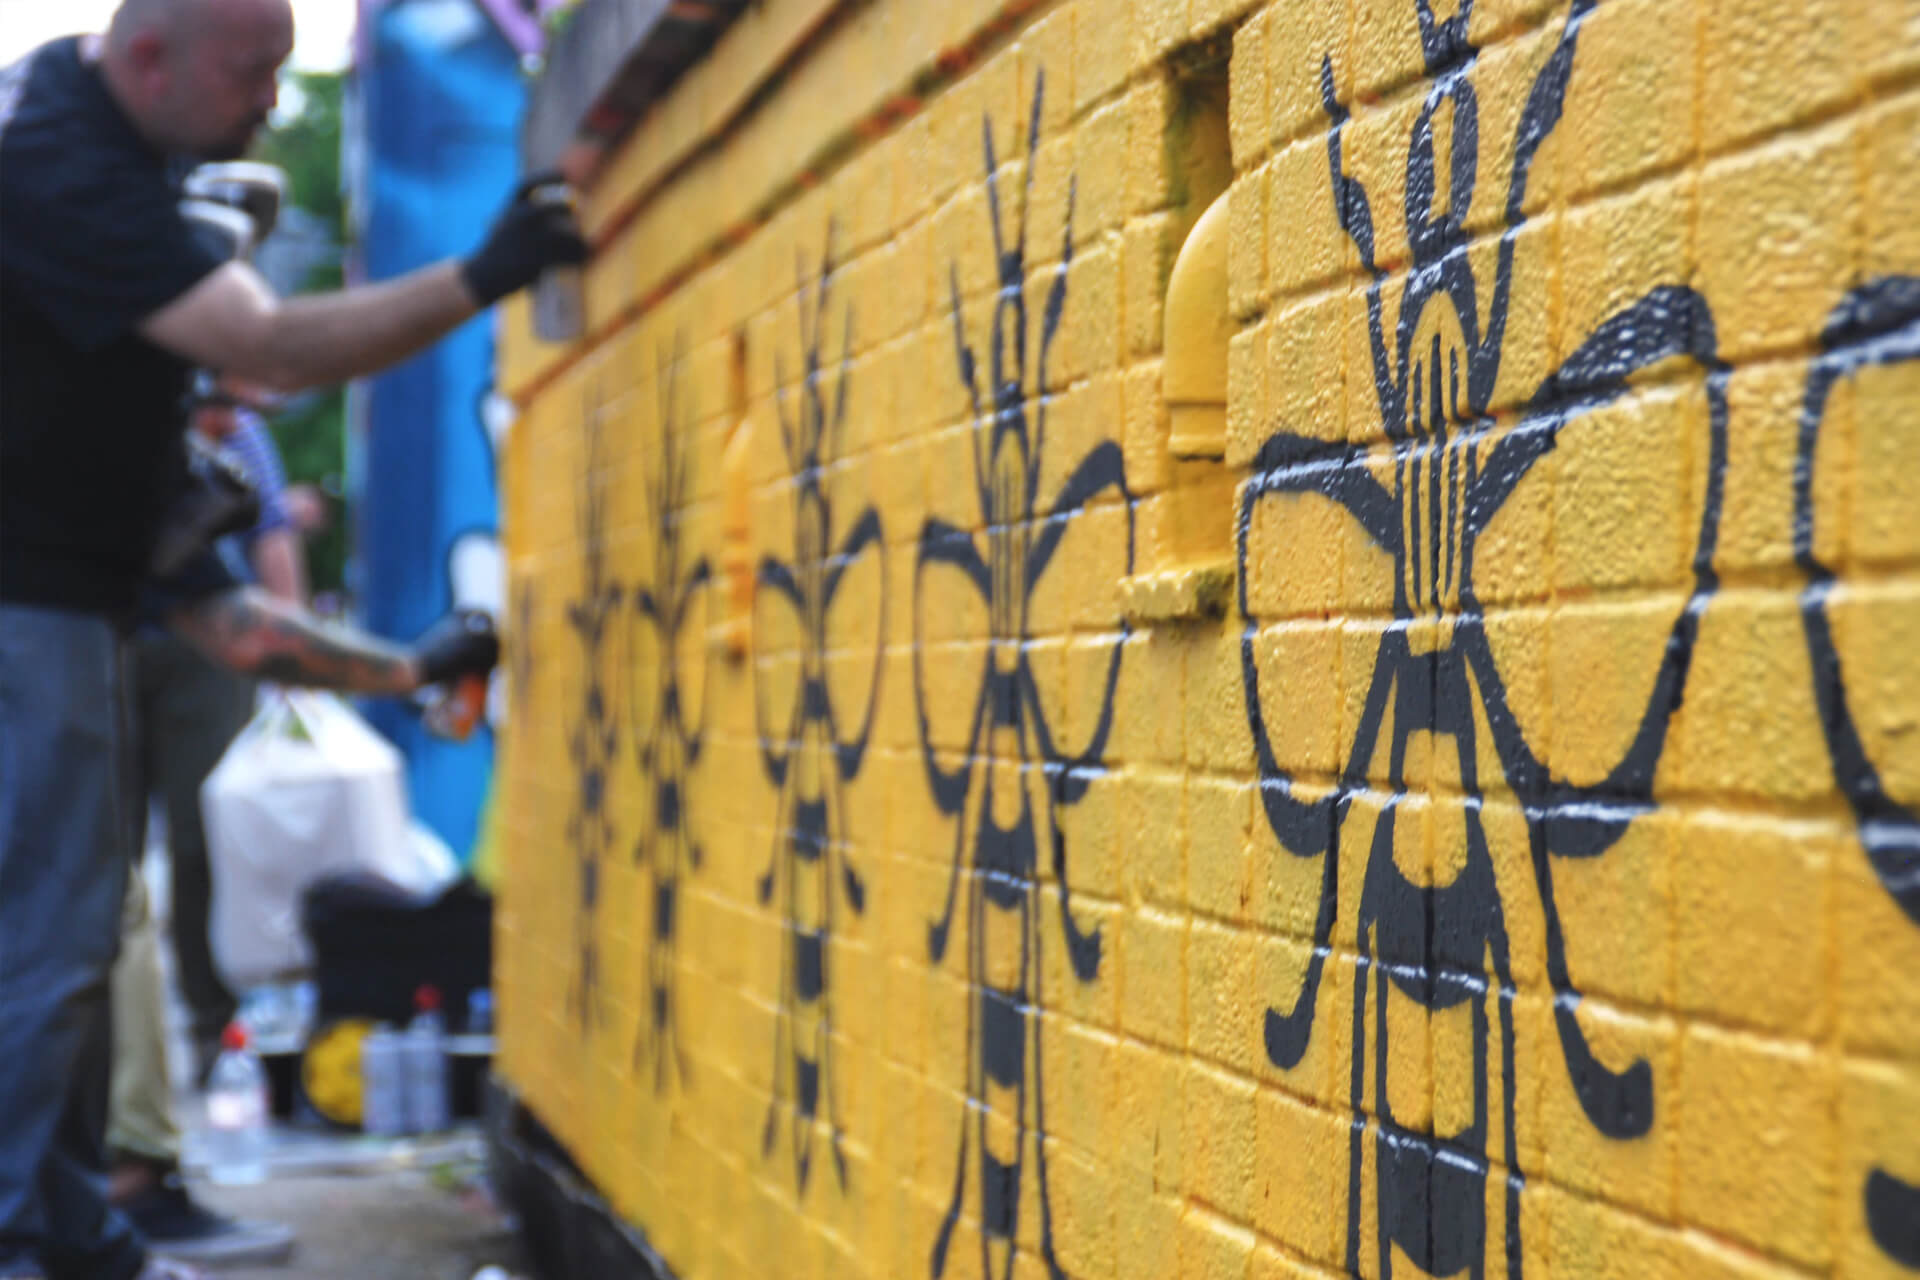 A yellow wall with the 'Manchester Bee' symbol painted on it multiple times